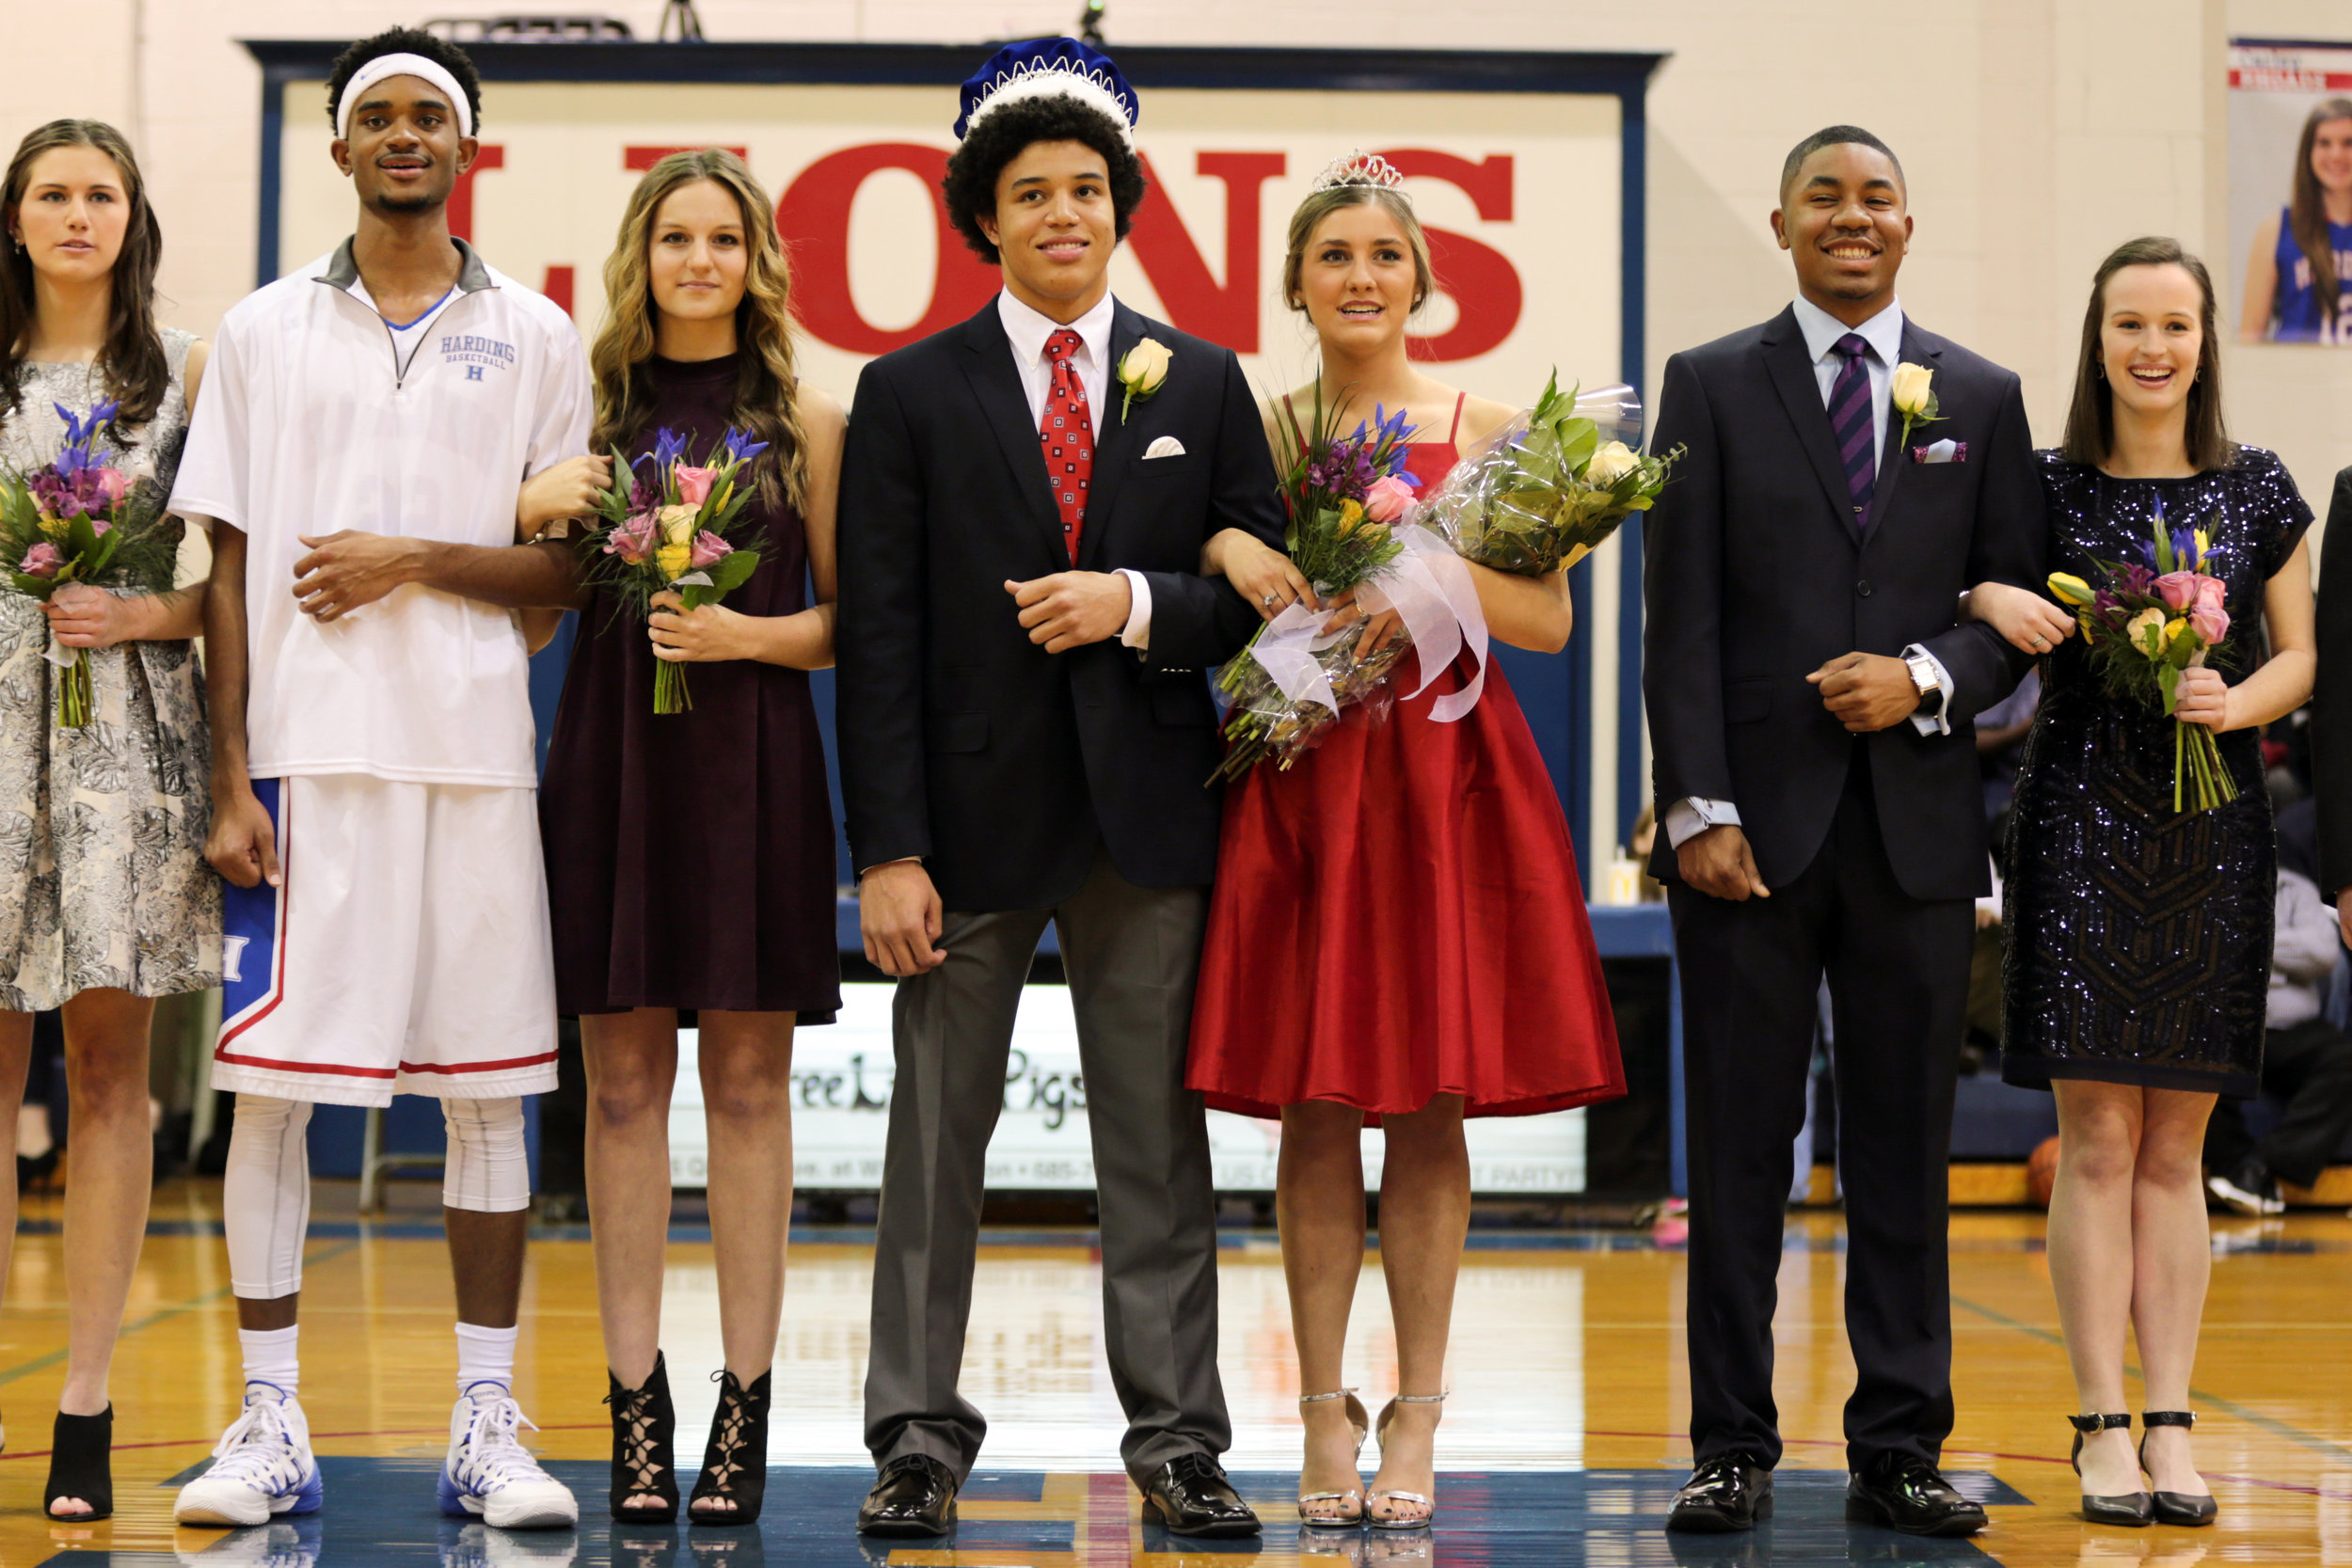 Seniors: Julian Isabel and Taylor Aeschliman, James Townsdin and Isabel Lievens, Grant Hill and Rebecca Rowsey